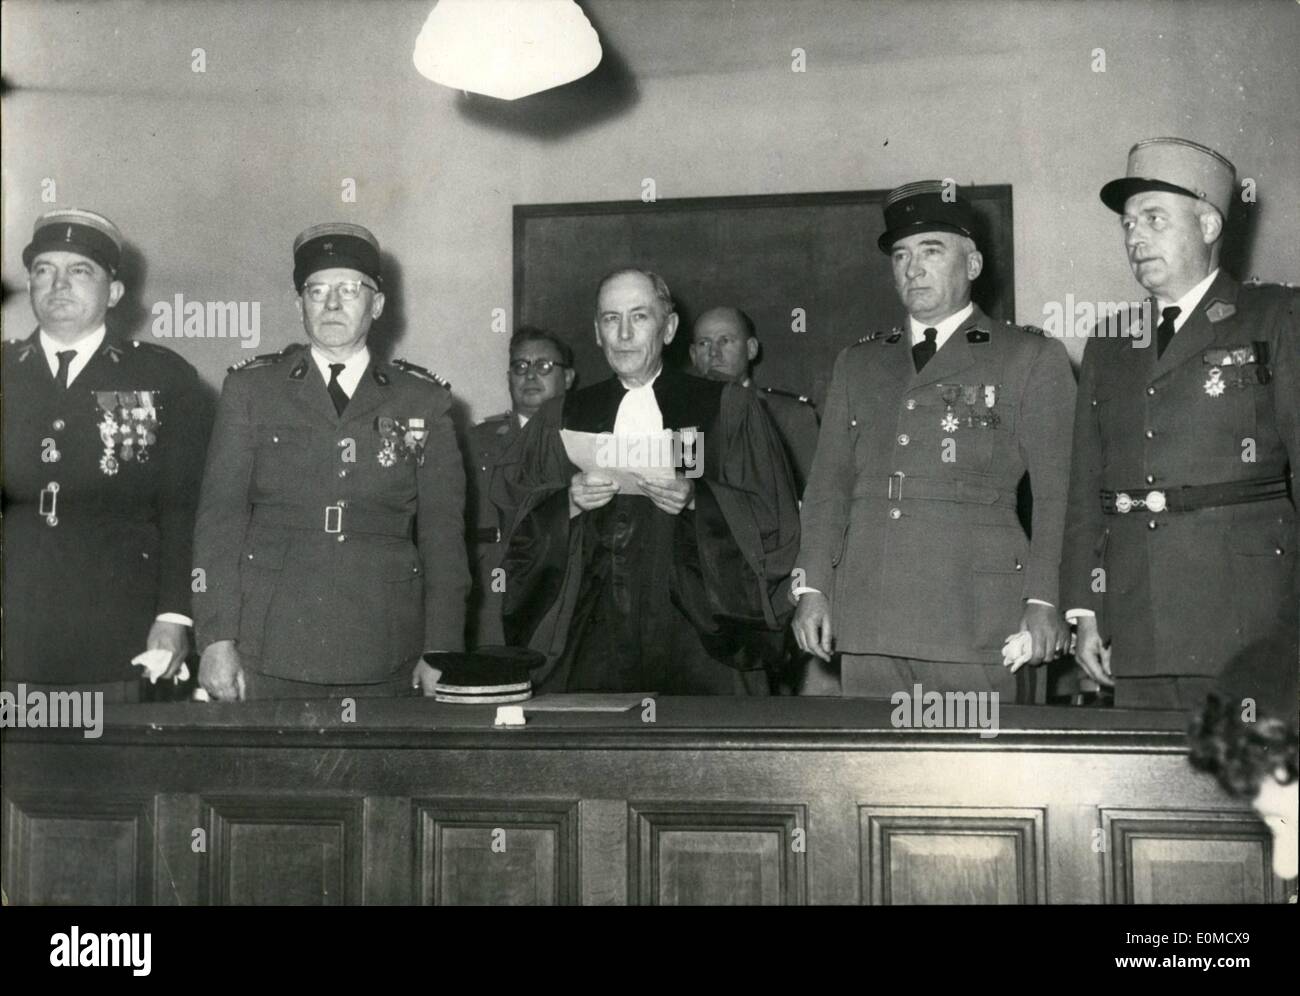 Oct. 10, 1954 - ''Butcher'' of Paris'' and his assistant to die; President of the military tribunal Bouessel-Dubourg reads the death sentence at the trial of Oberg (called the ''Butcher of Paris'') and his assistant Knochen. Oberg was the chief of the Paris Gestapo known for his Ruthless action against the Patriots and hesitant s. The trial lasted many weeks at the Paris military court. Oberg's main excuse was that ''He was obeying orders from his superiors' Stock Photo